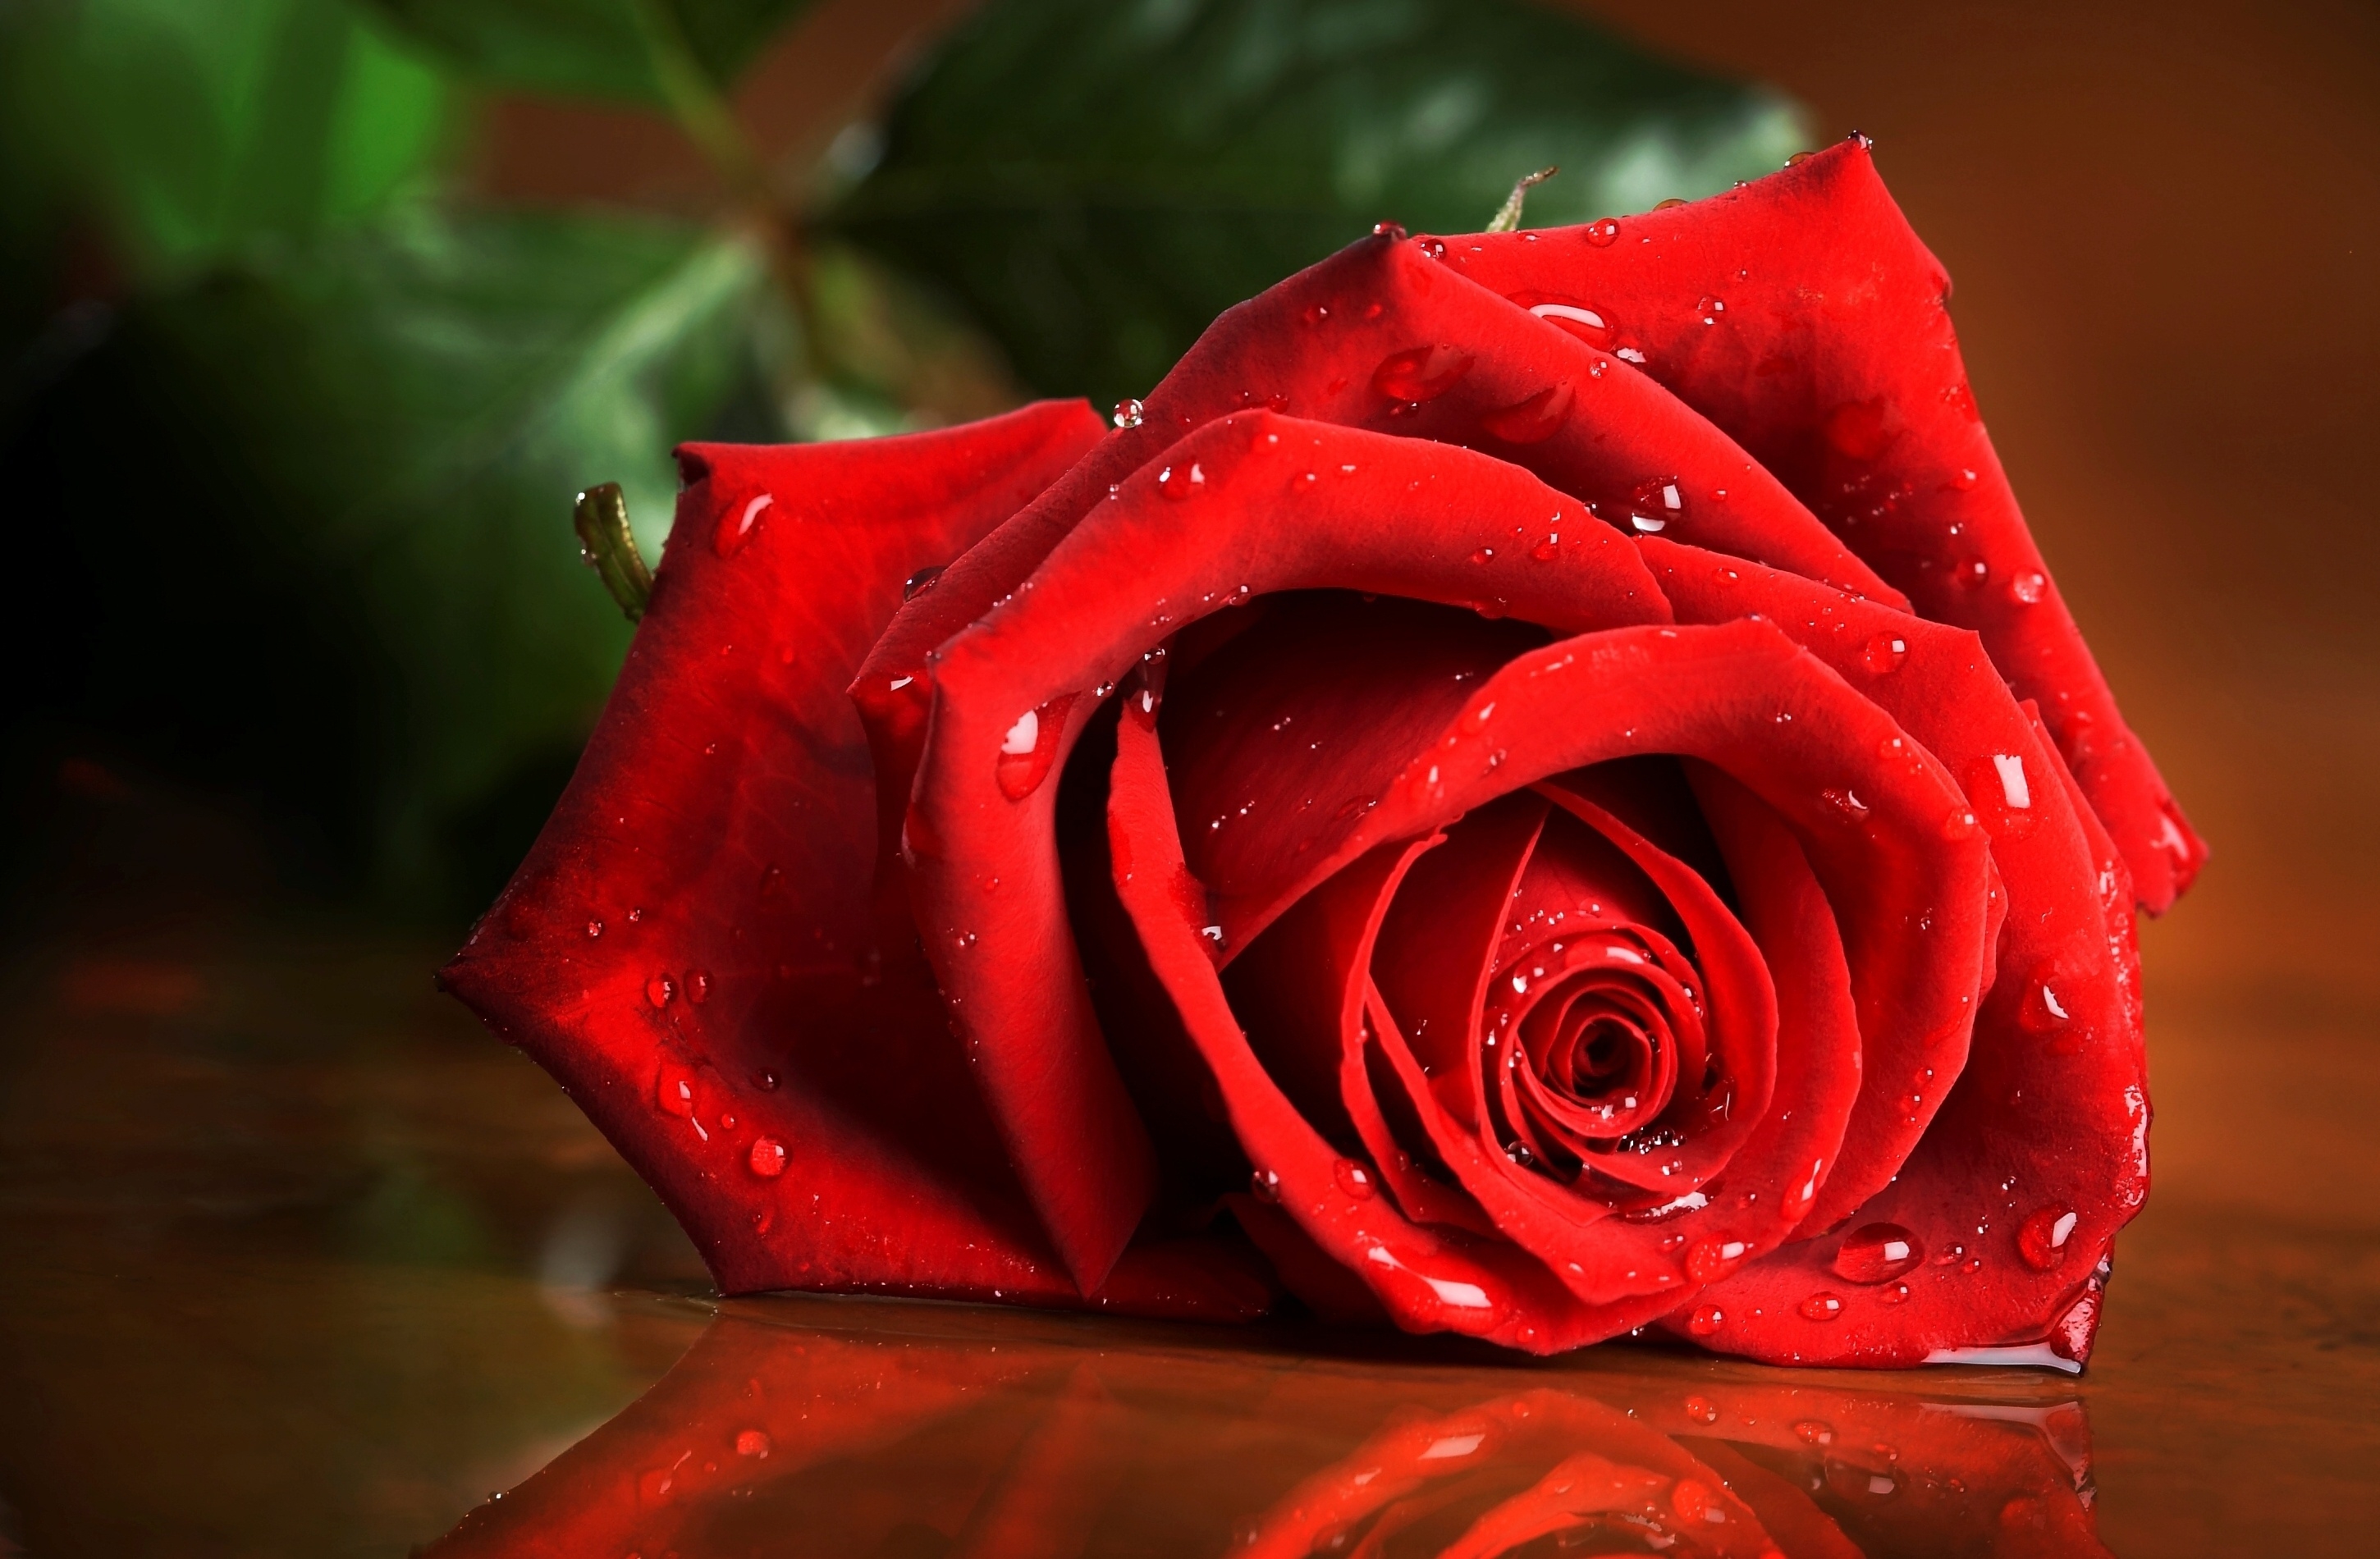 56725 free wallpaper 720x1280 for phone, download images macro, scarlet rose, red rose, rose flower 720x1280 for mobile